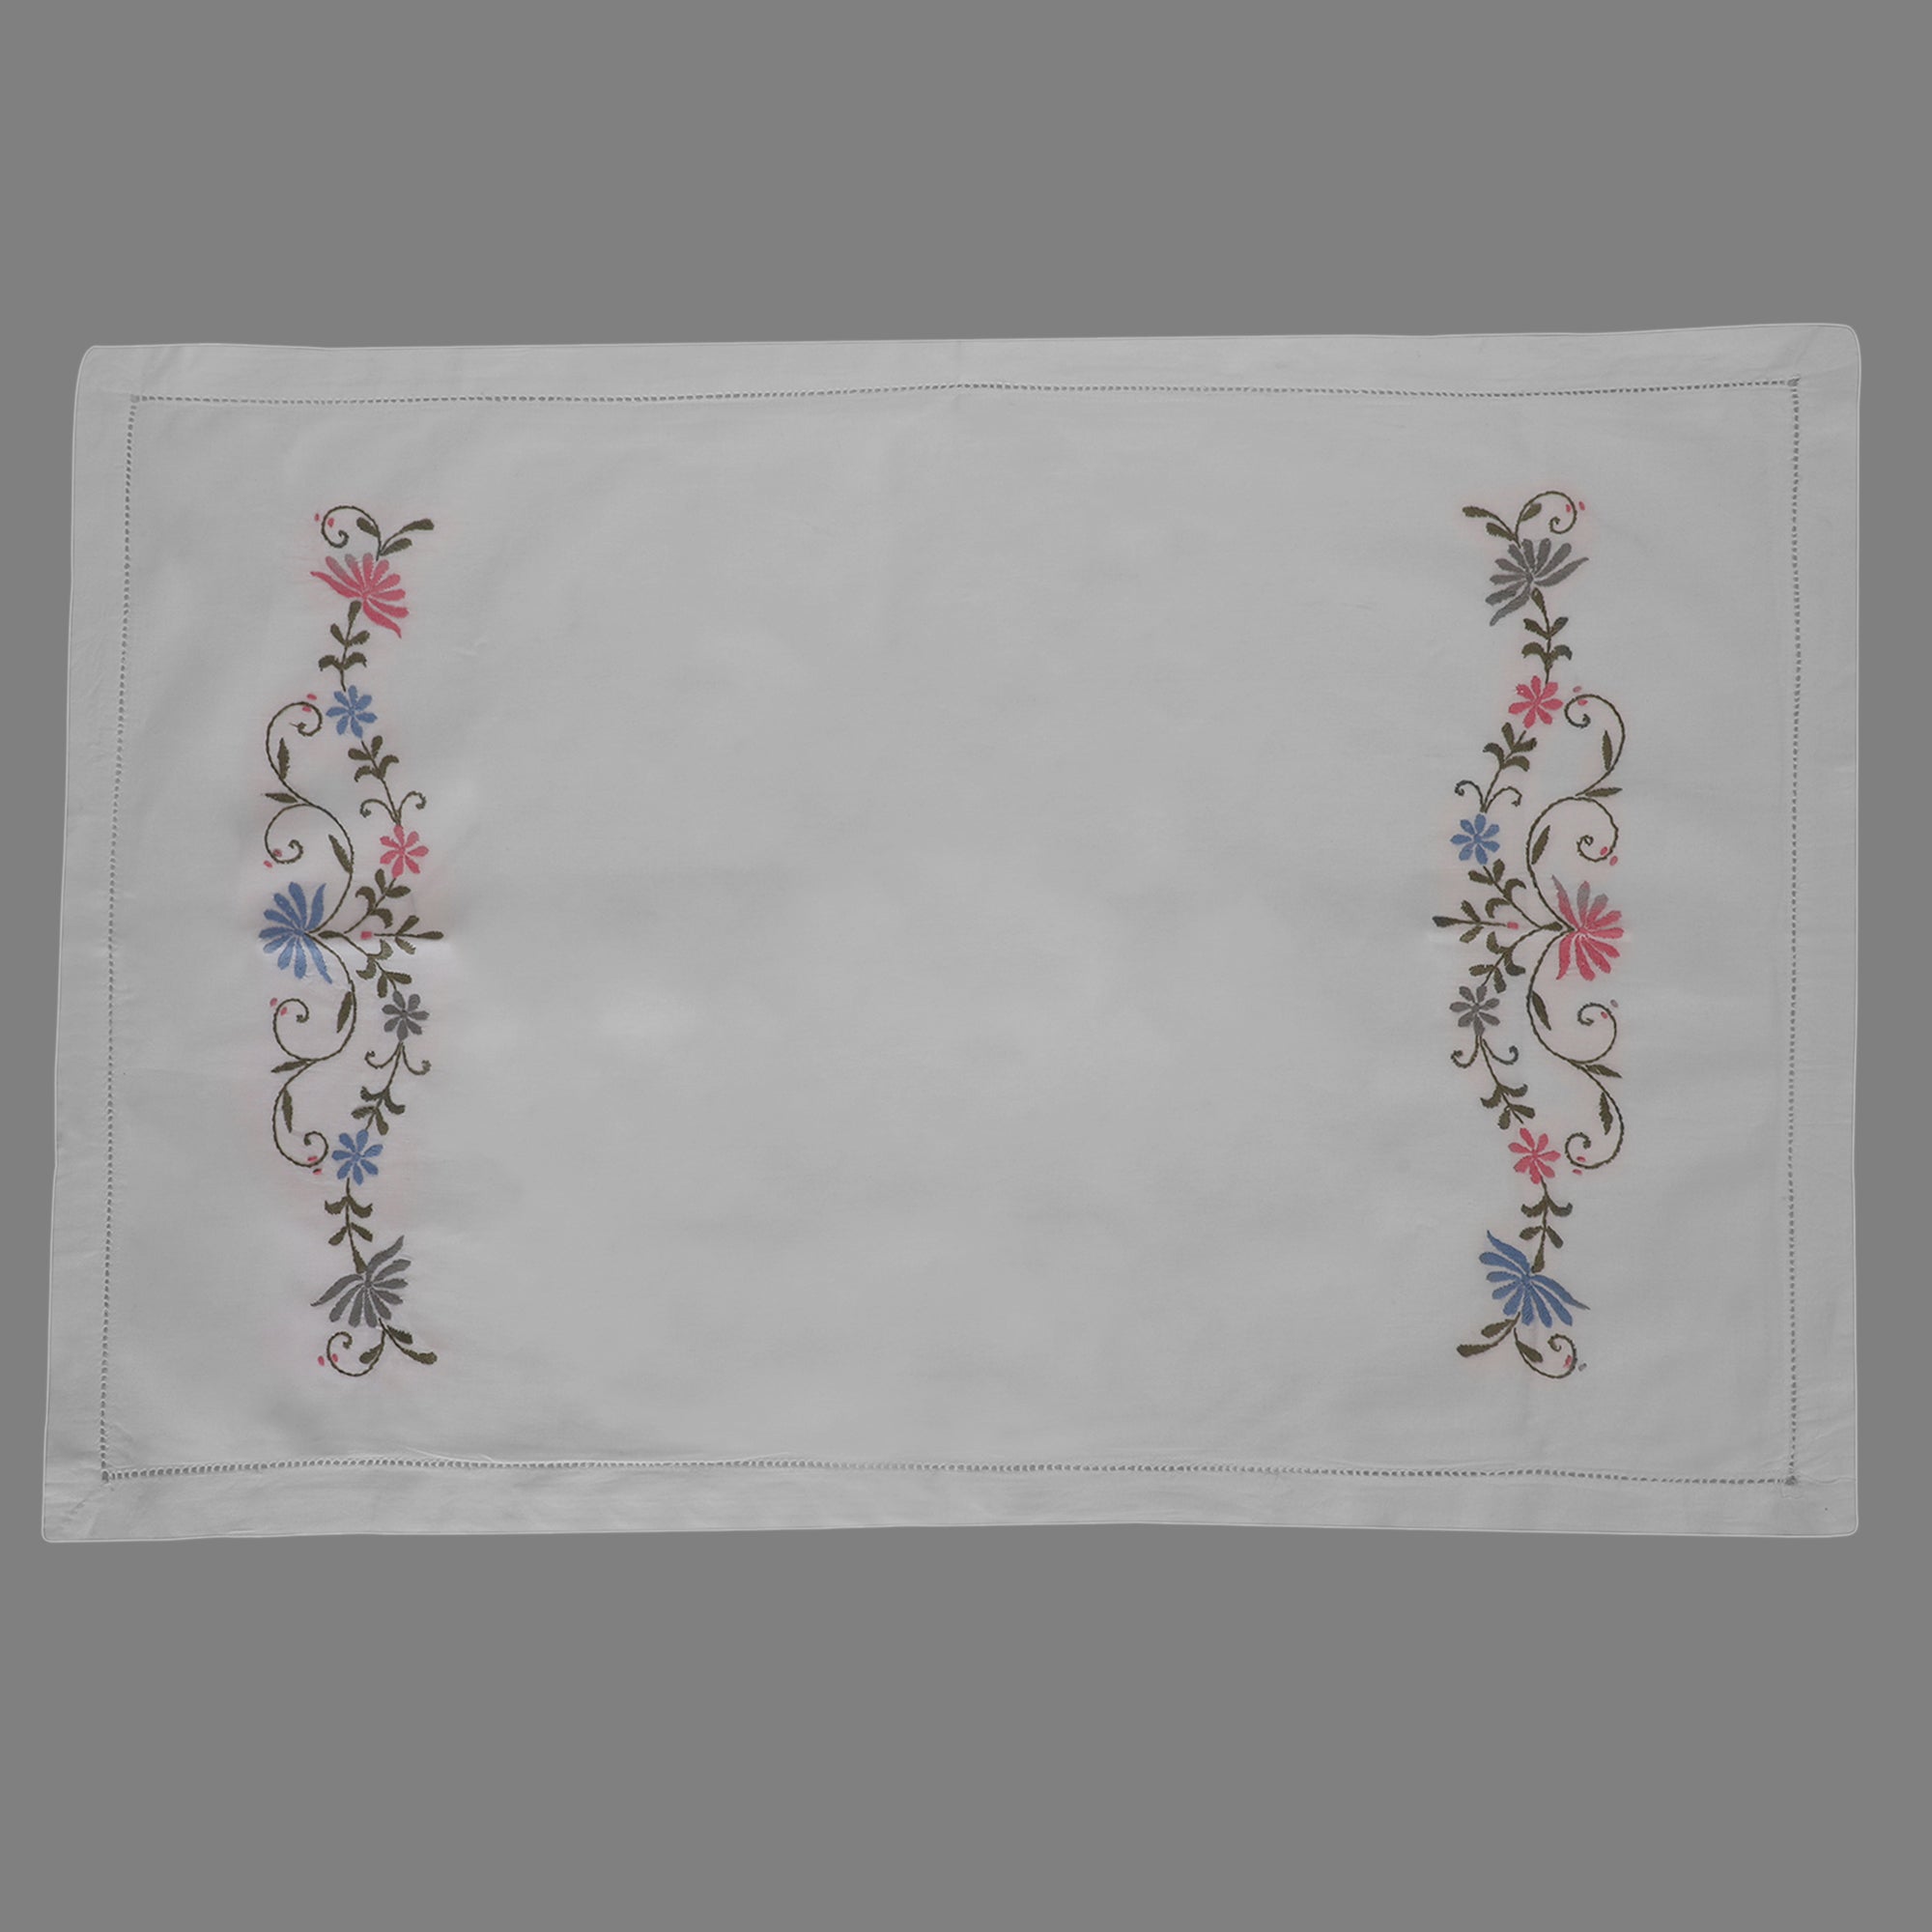 MULTICOLOUR HAND EMBROIDERED WHITE COTTON BED COVER WITH PILLOW COVERS